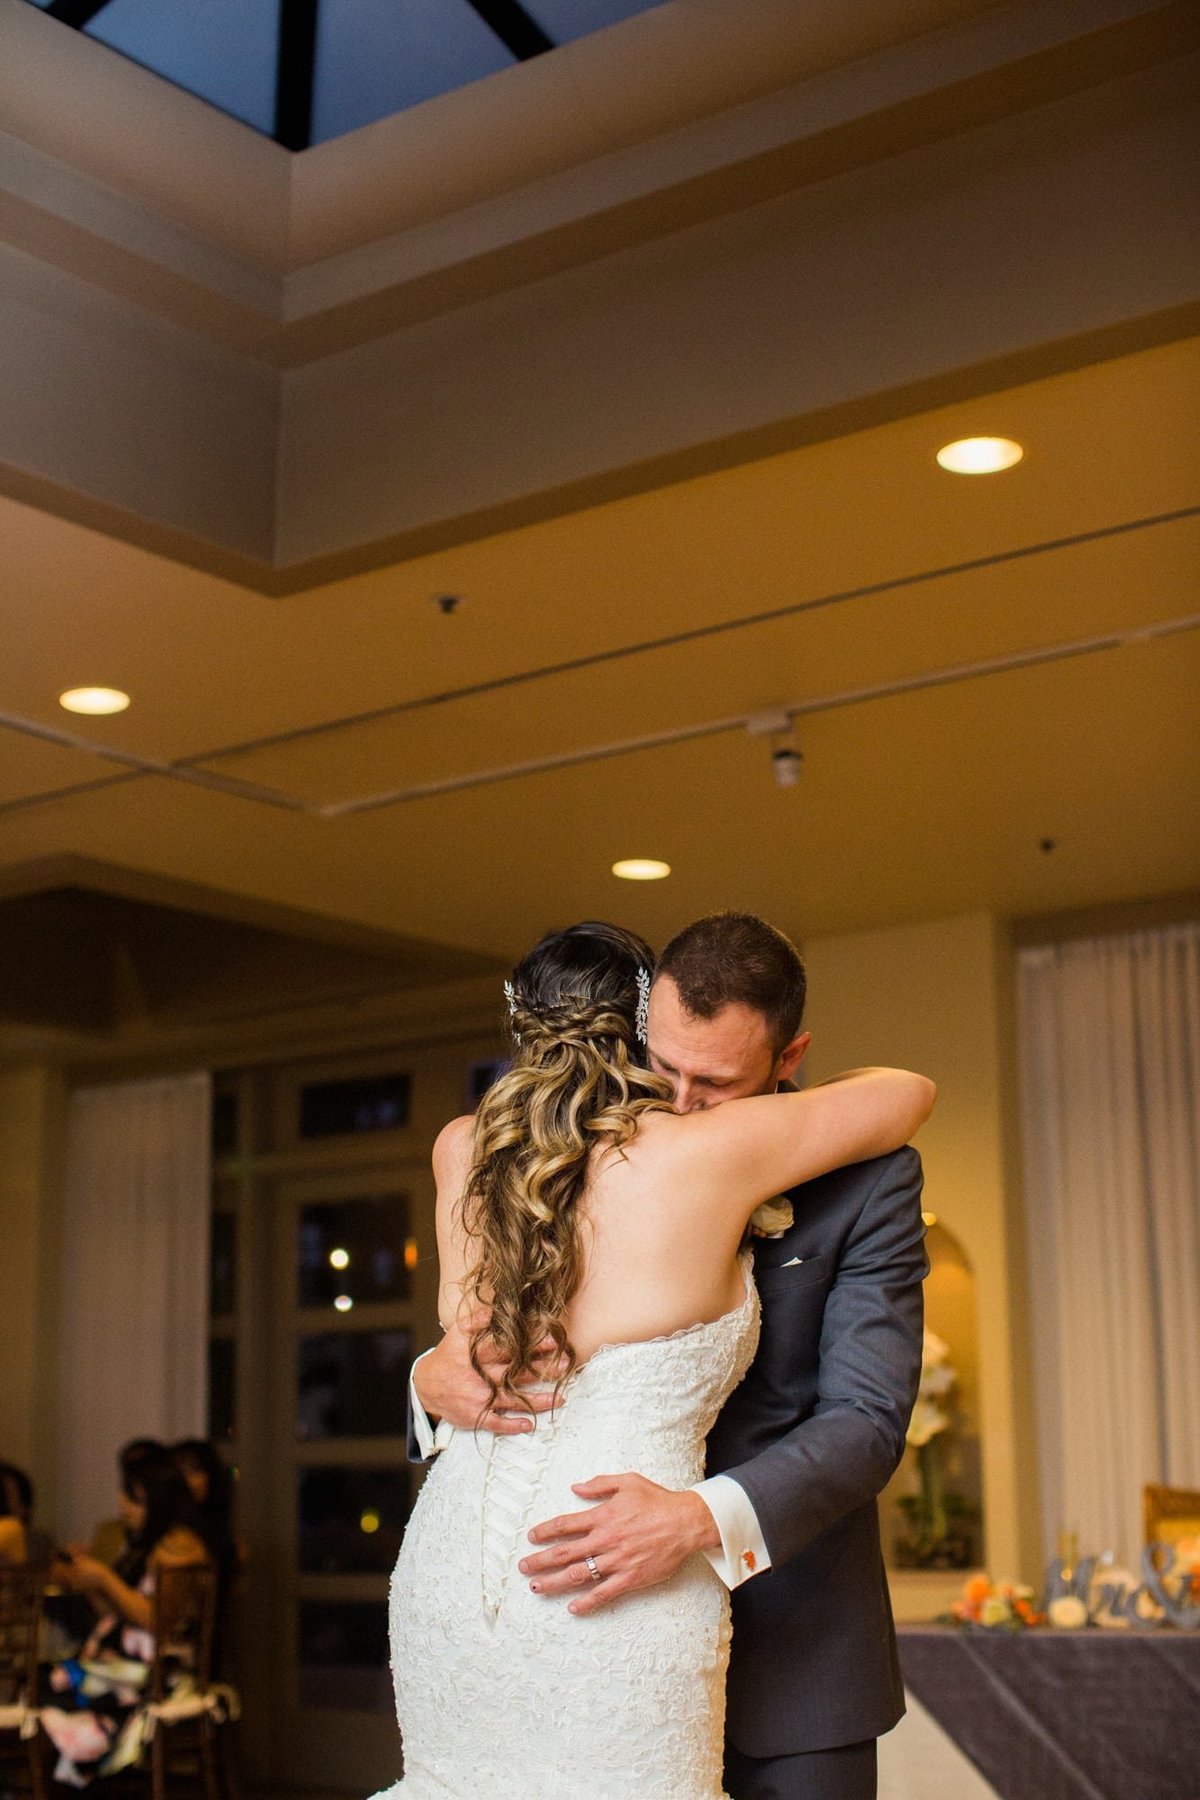 Bride and Groom embrace during their first dance